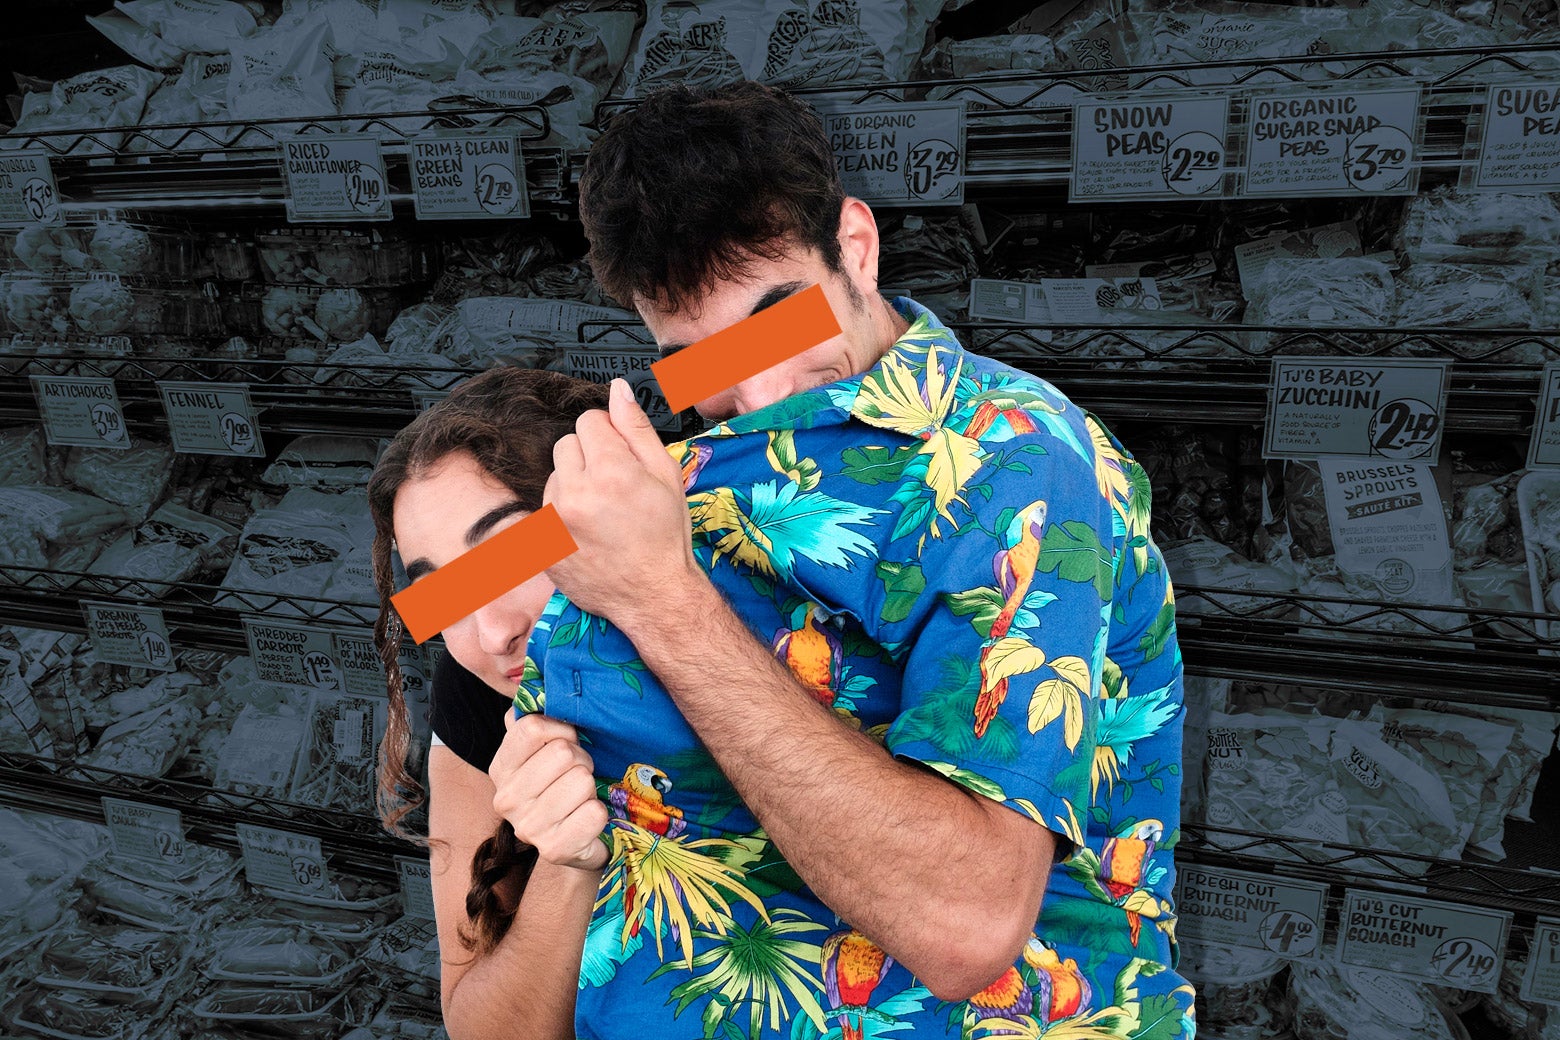 A male Trader Joe's employee in a Hawaiian shirt shields an apparently naked woman with brown hair beneath his shirt. Both have orange bars over their eyes for anonymity. 